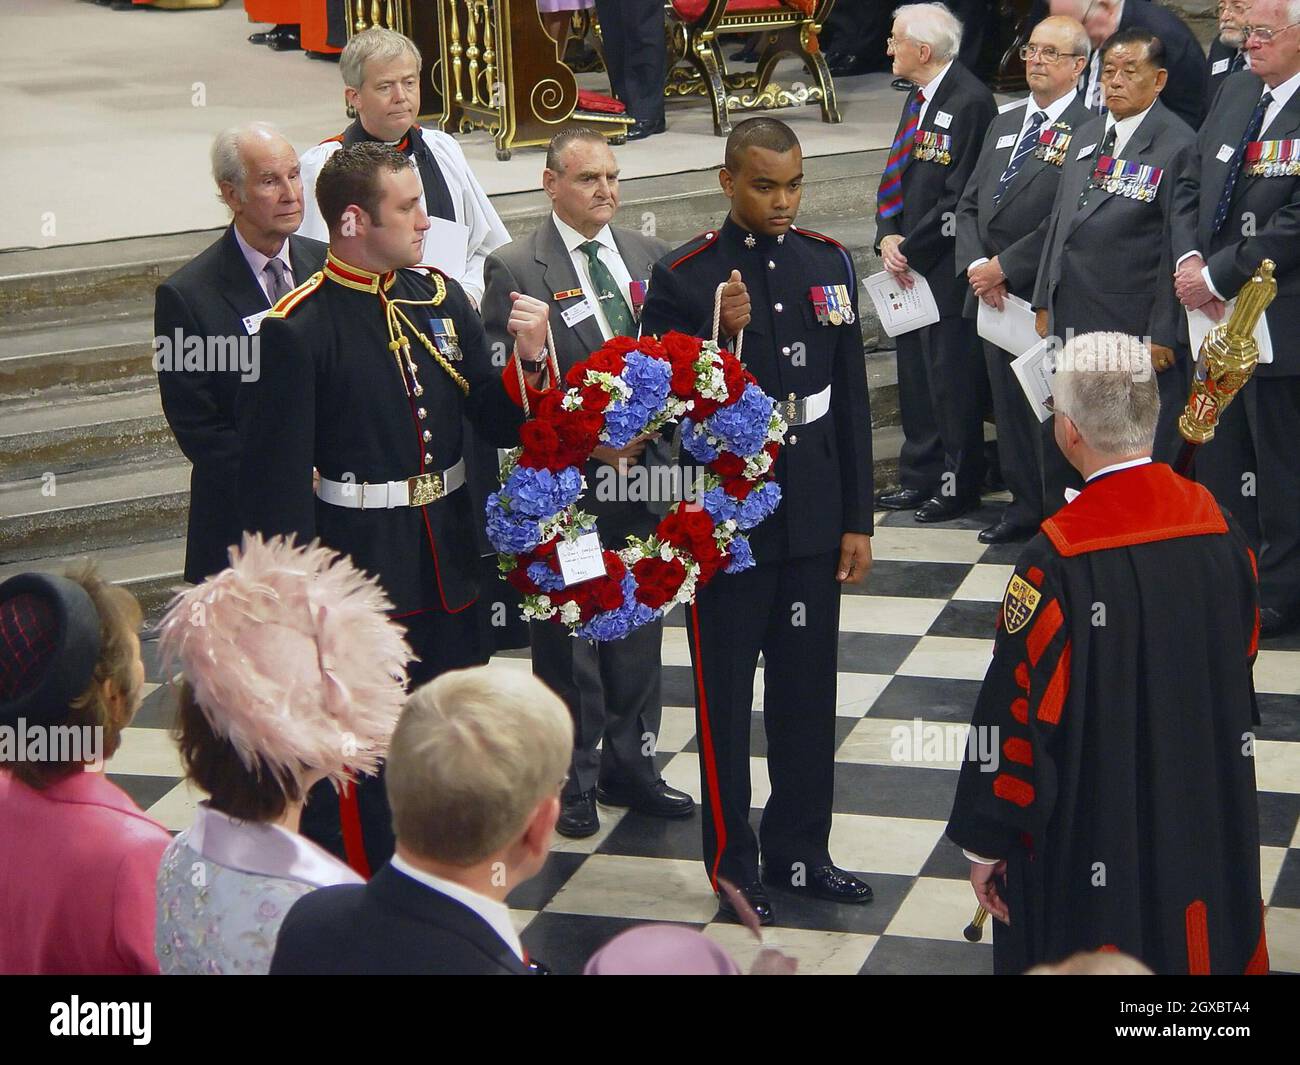 Private Johnson Beharry, who last year became the first new holder of the Victoria Cross in more than two decades, carries a wreath with other Victoria and George Cross holders. Stock Photo